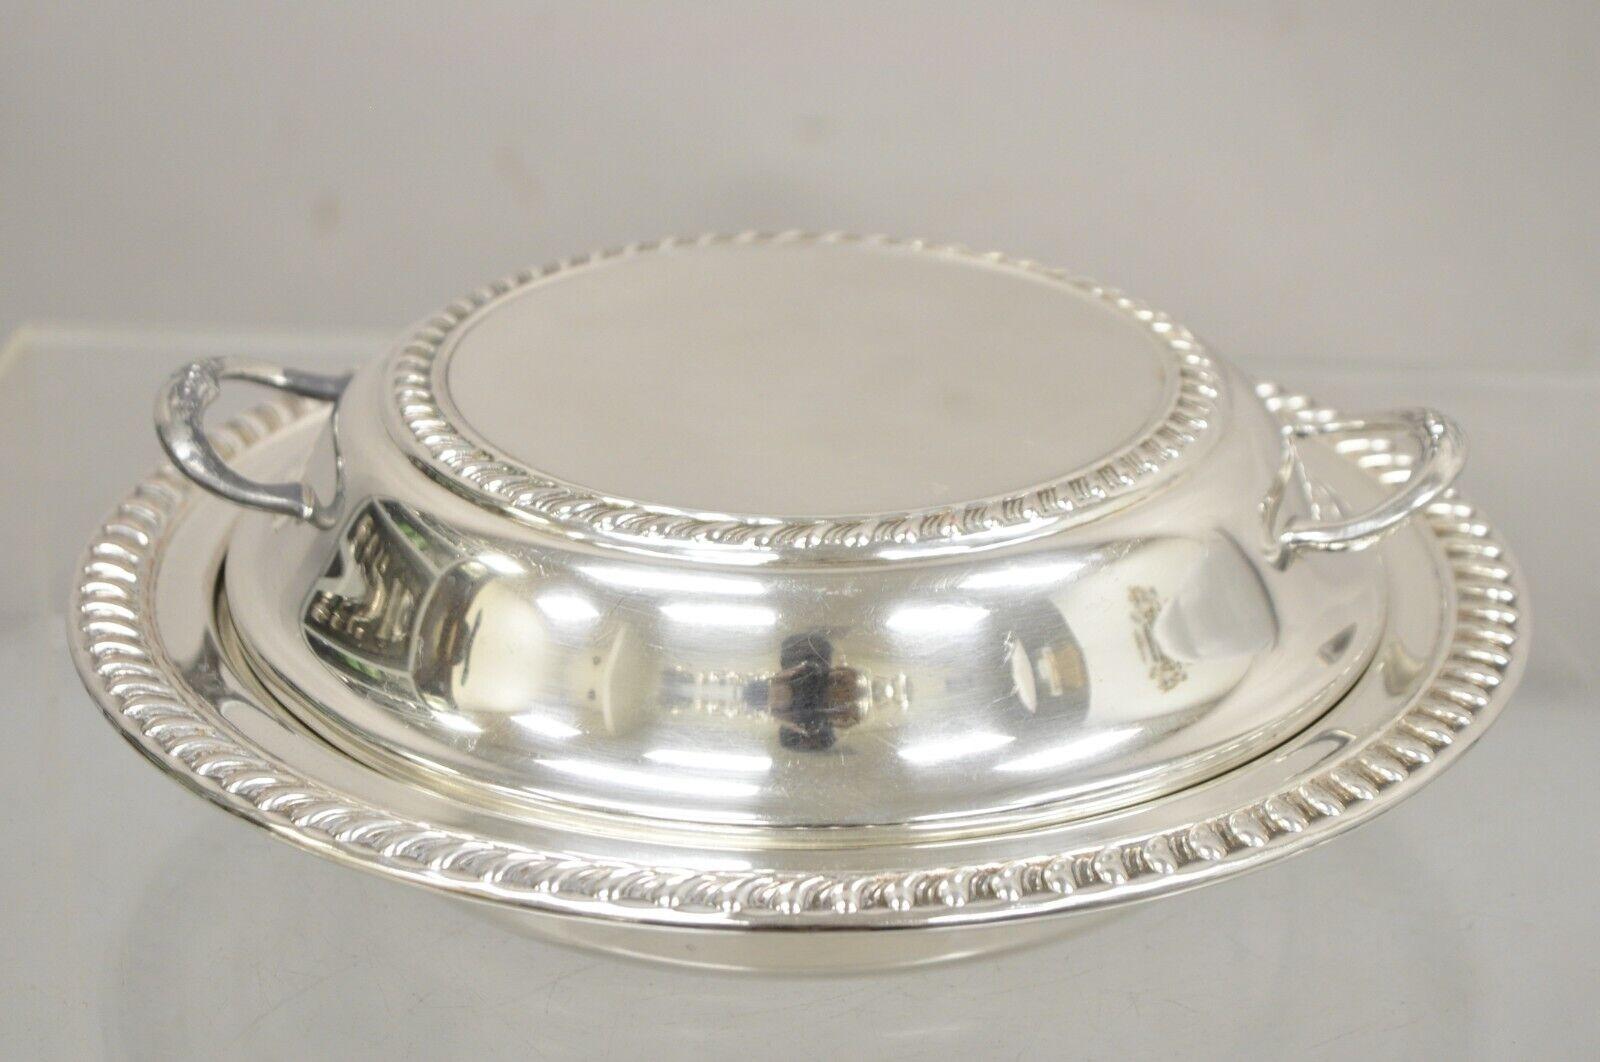 Vintage Sheffield Silver on Copper Silver Plated Sheridan Lidded Serving Dish. Circa Mid 20th Century. Measurements: 3